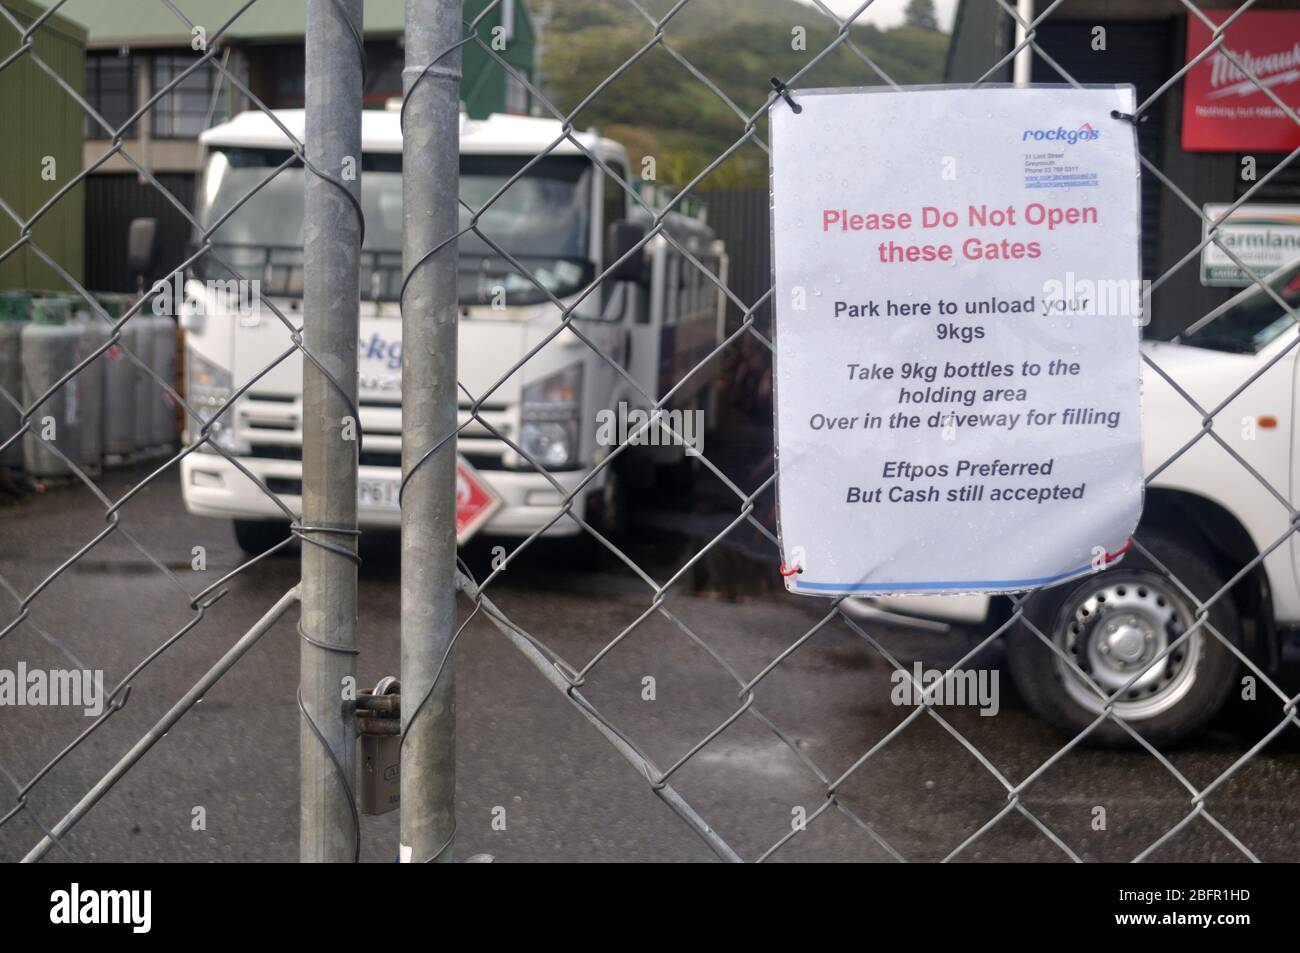 GREYMOUTH, NEW ZEALAND, APRIL 18 2020: Signage shows that a gas bottle business is closed during the Level 4 Covid 19 lockdown in New Zealand, April 18,  2020 Stock Photo